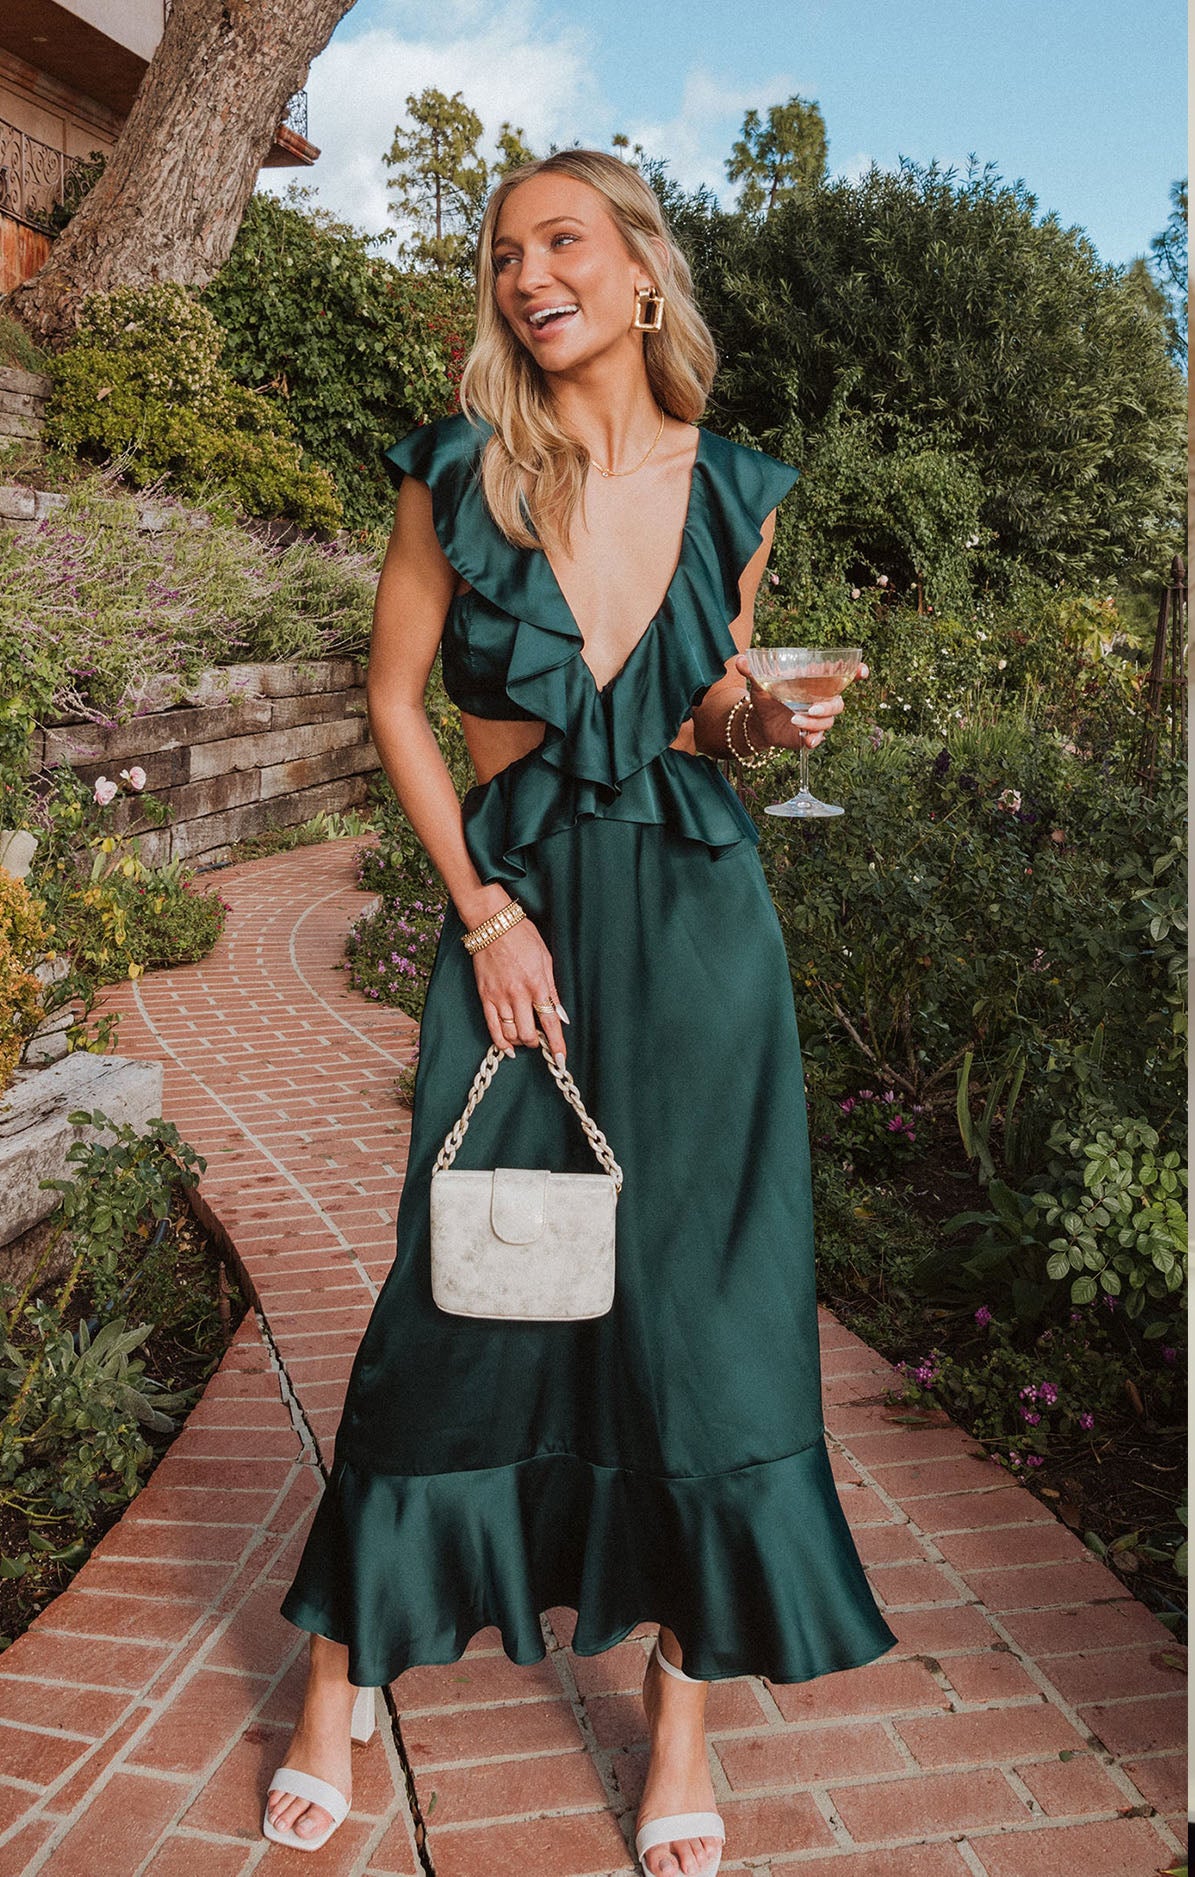 Wedding Guest Outfit Ideas To Stand Out - Raisin